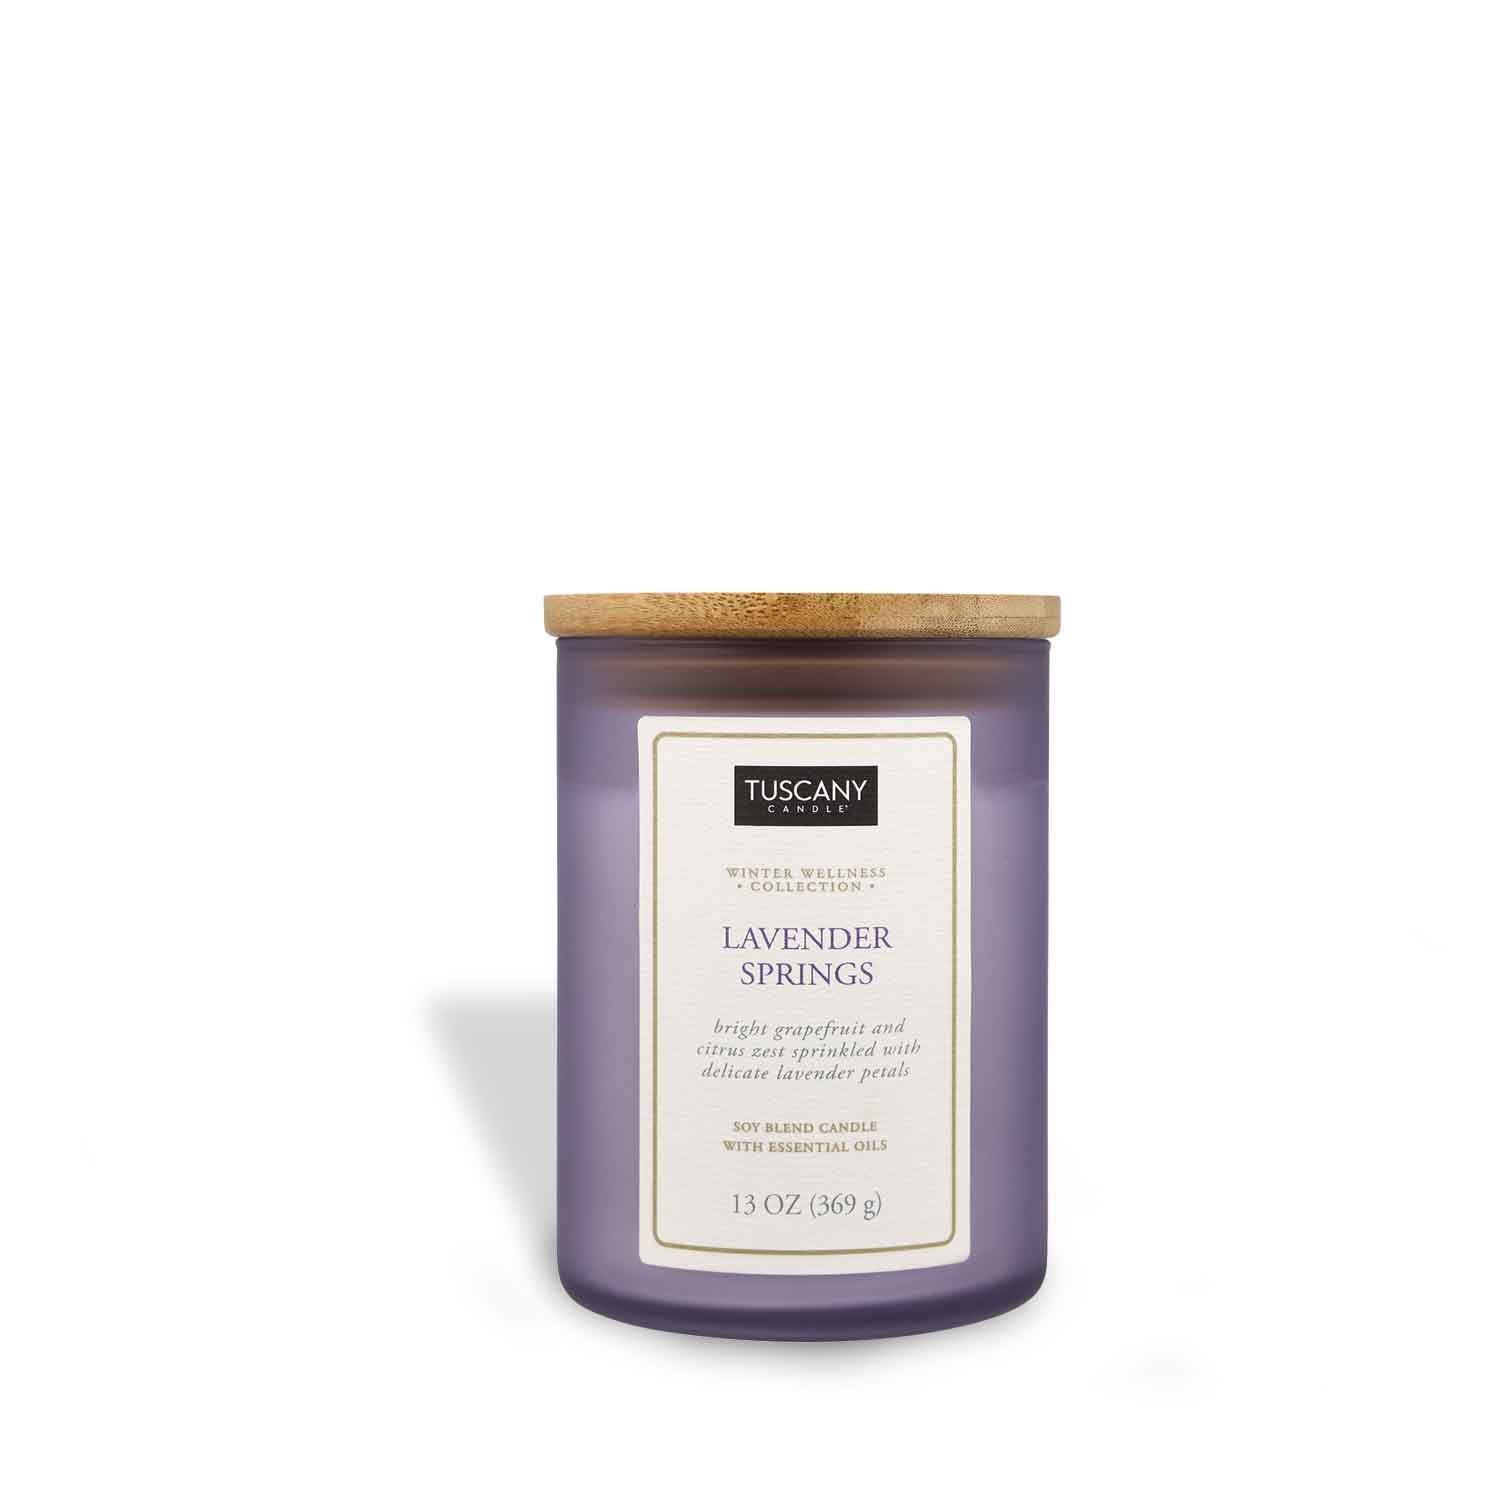 Lavender Springs candle from the Winter Wellness Aromatherapy collection, showcasing pure white wax in a colored matte-finish jar, accented with a chic paper label.